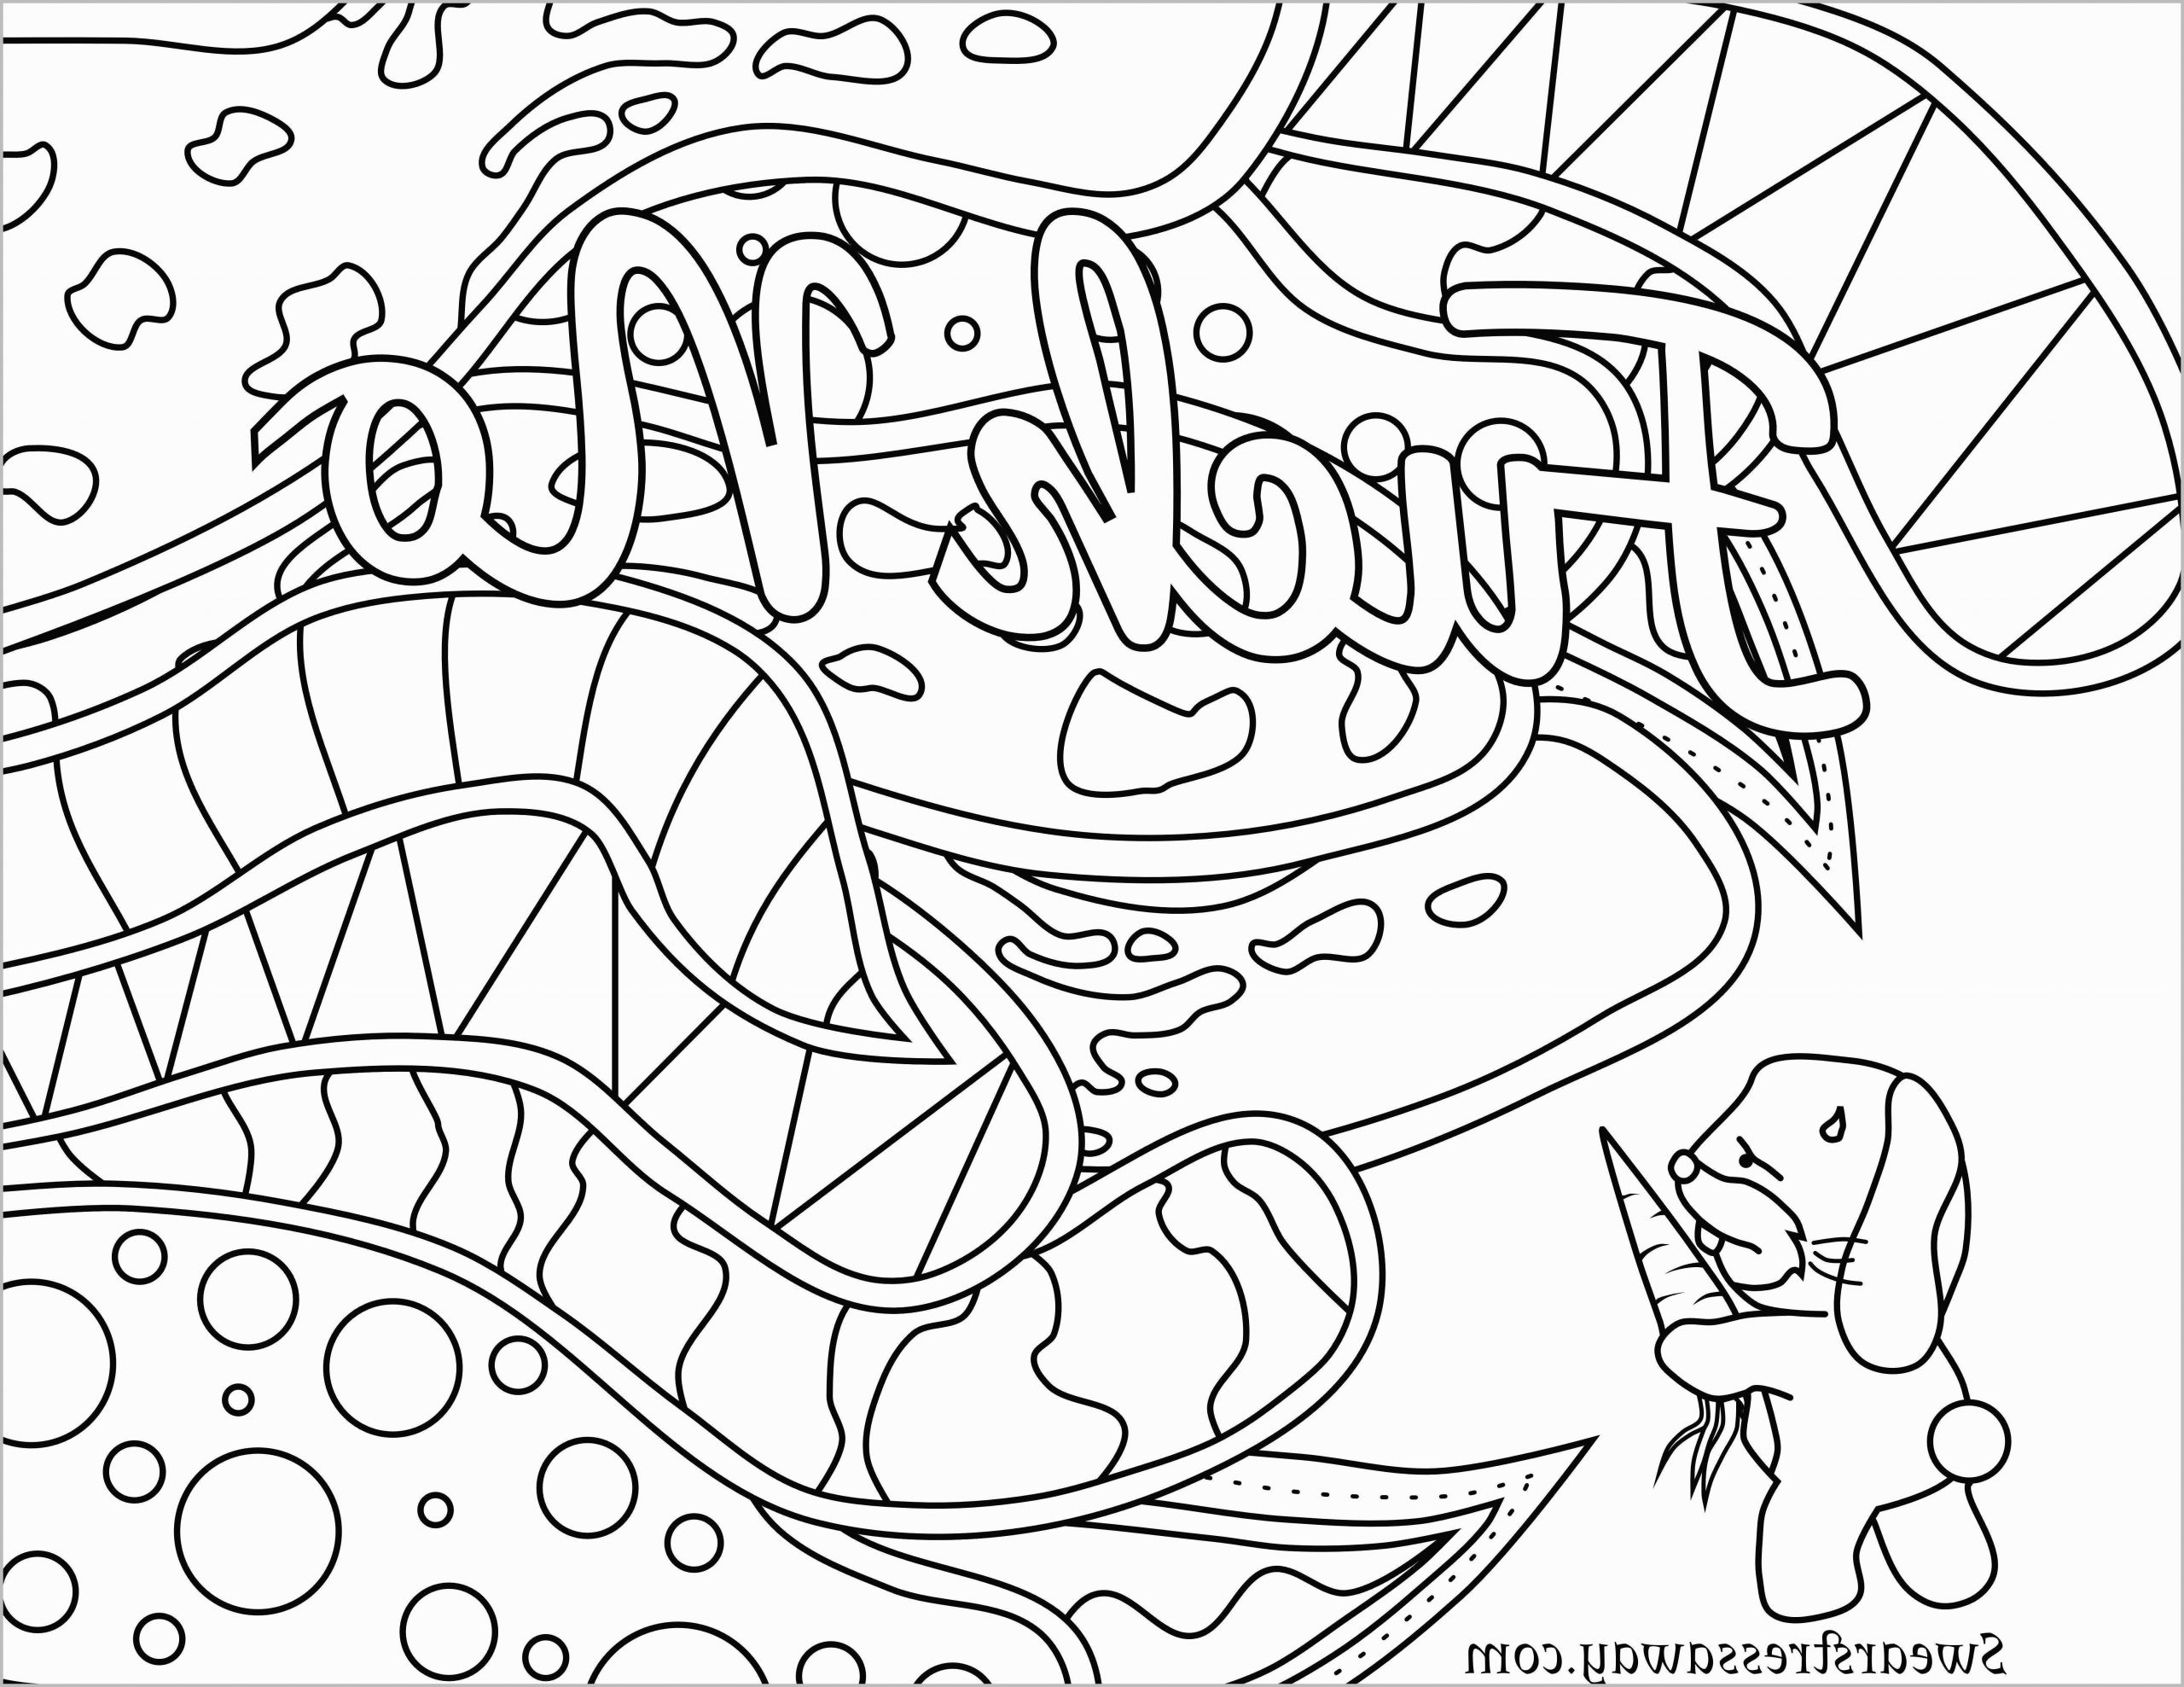 coloring pages : Swear Word Coloring Pages For Adults Best Of 25 Beautifu.....